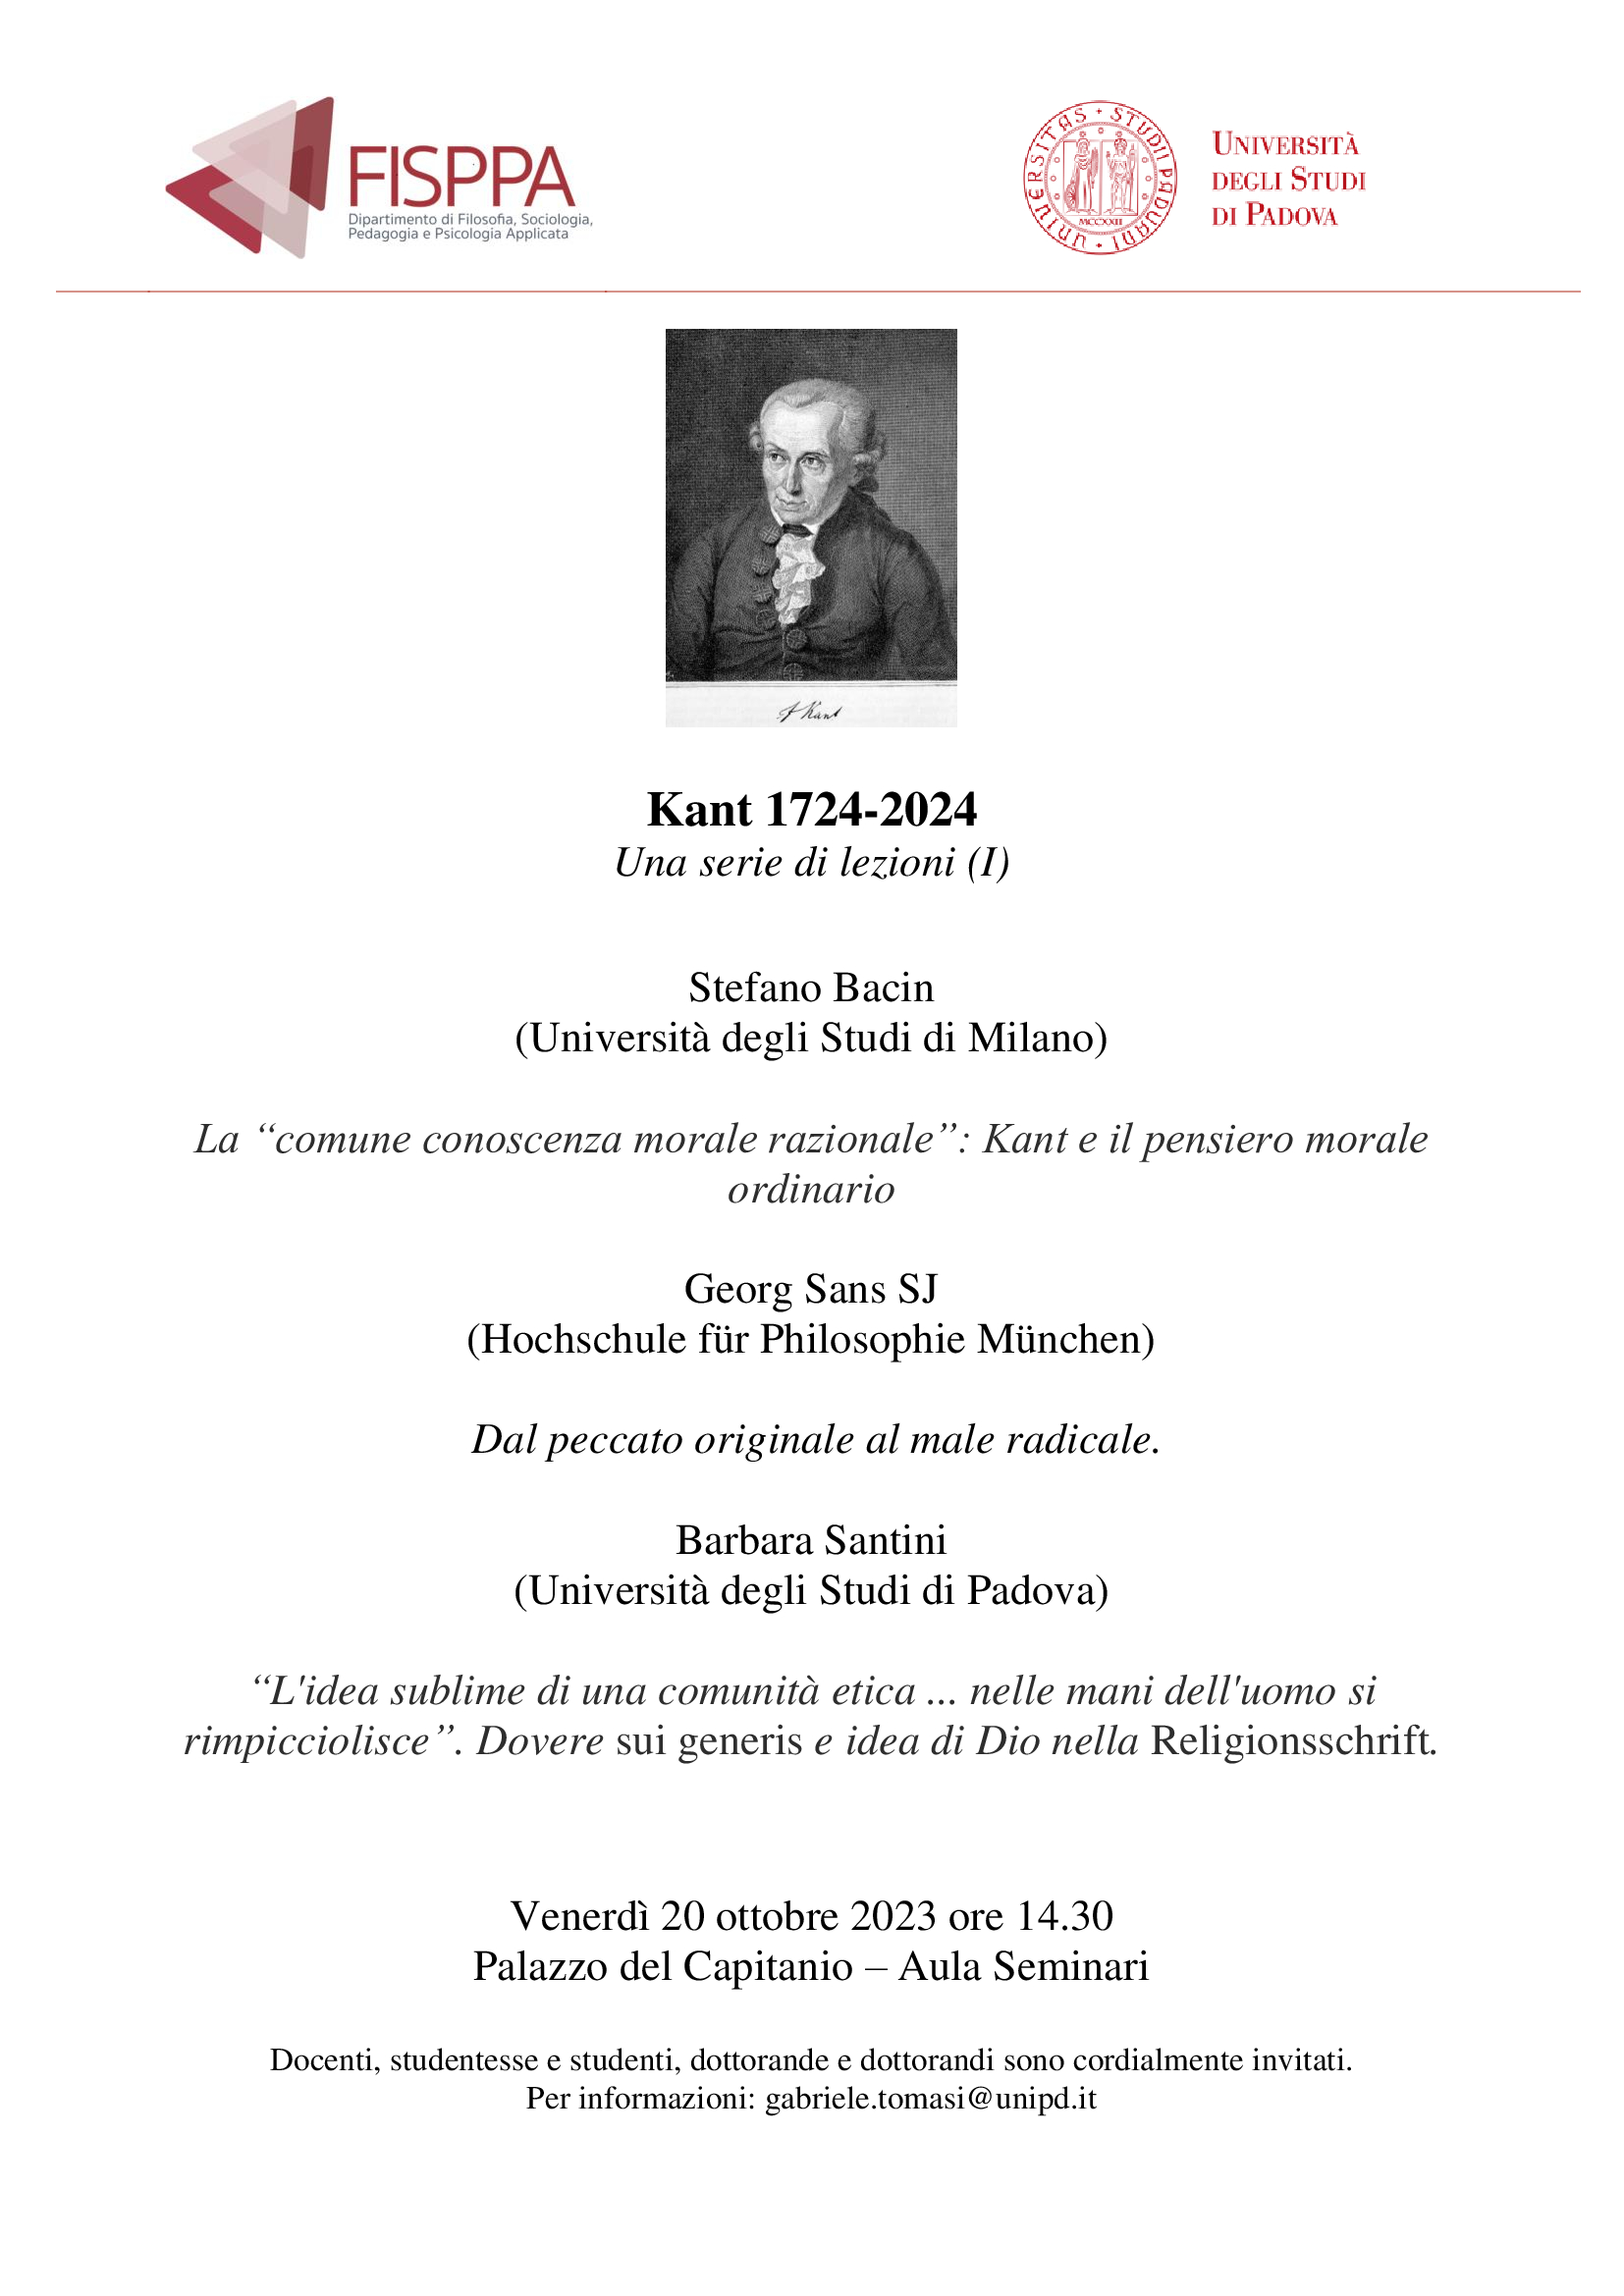 Conference: “Kant 1724-2024: A Series of Lectures, I” (Padova, 20 October 2023)